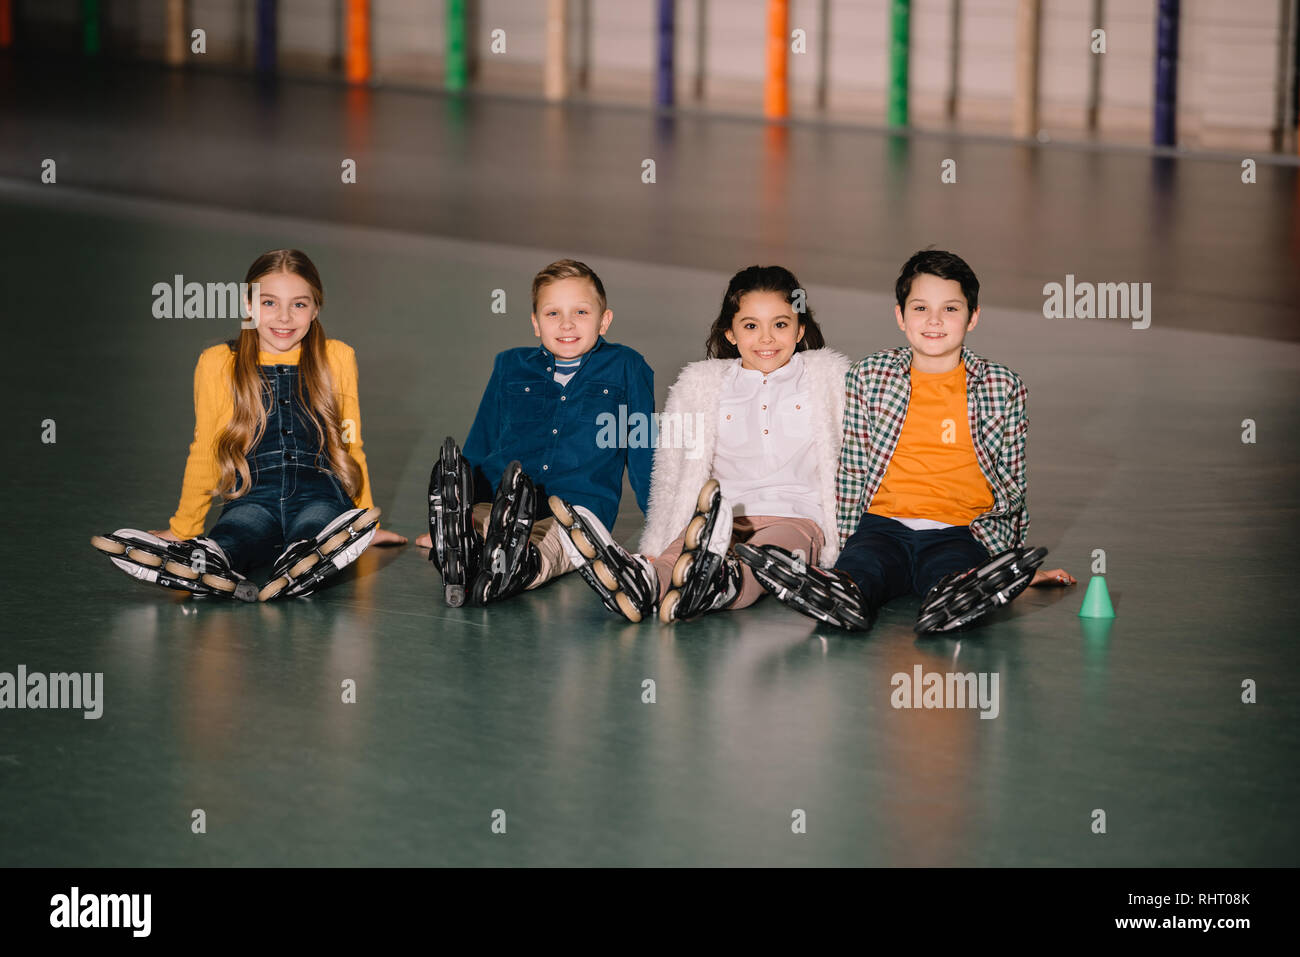 Group of kids in roller skates smiling at camera Stock Photo